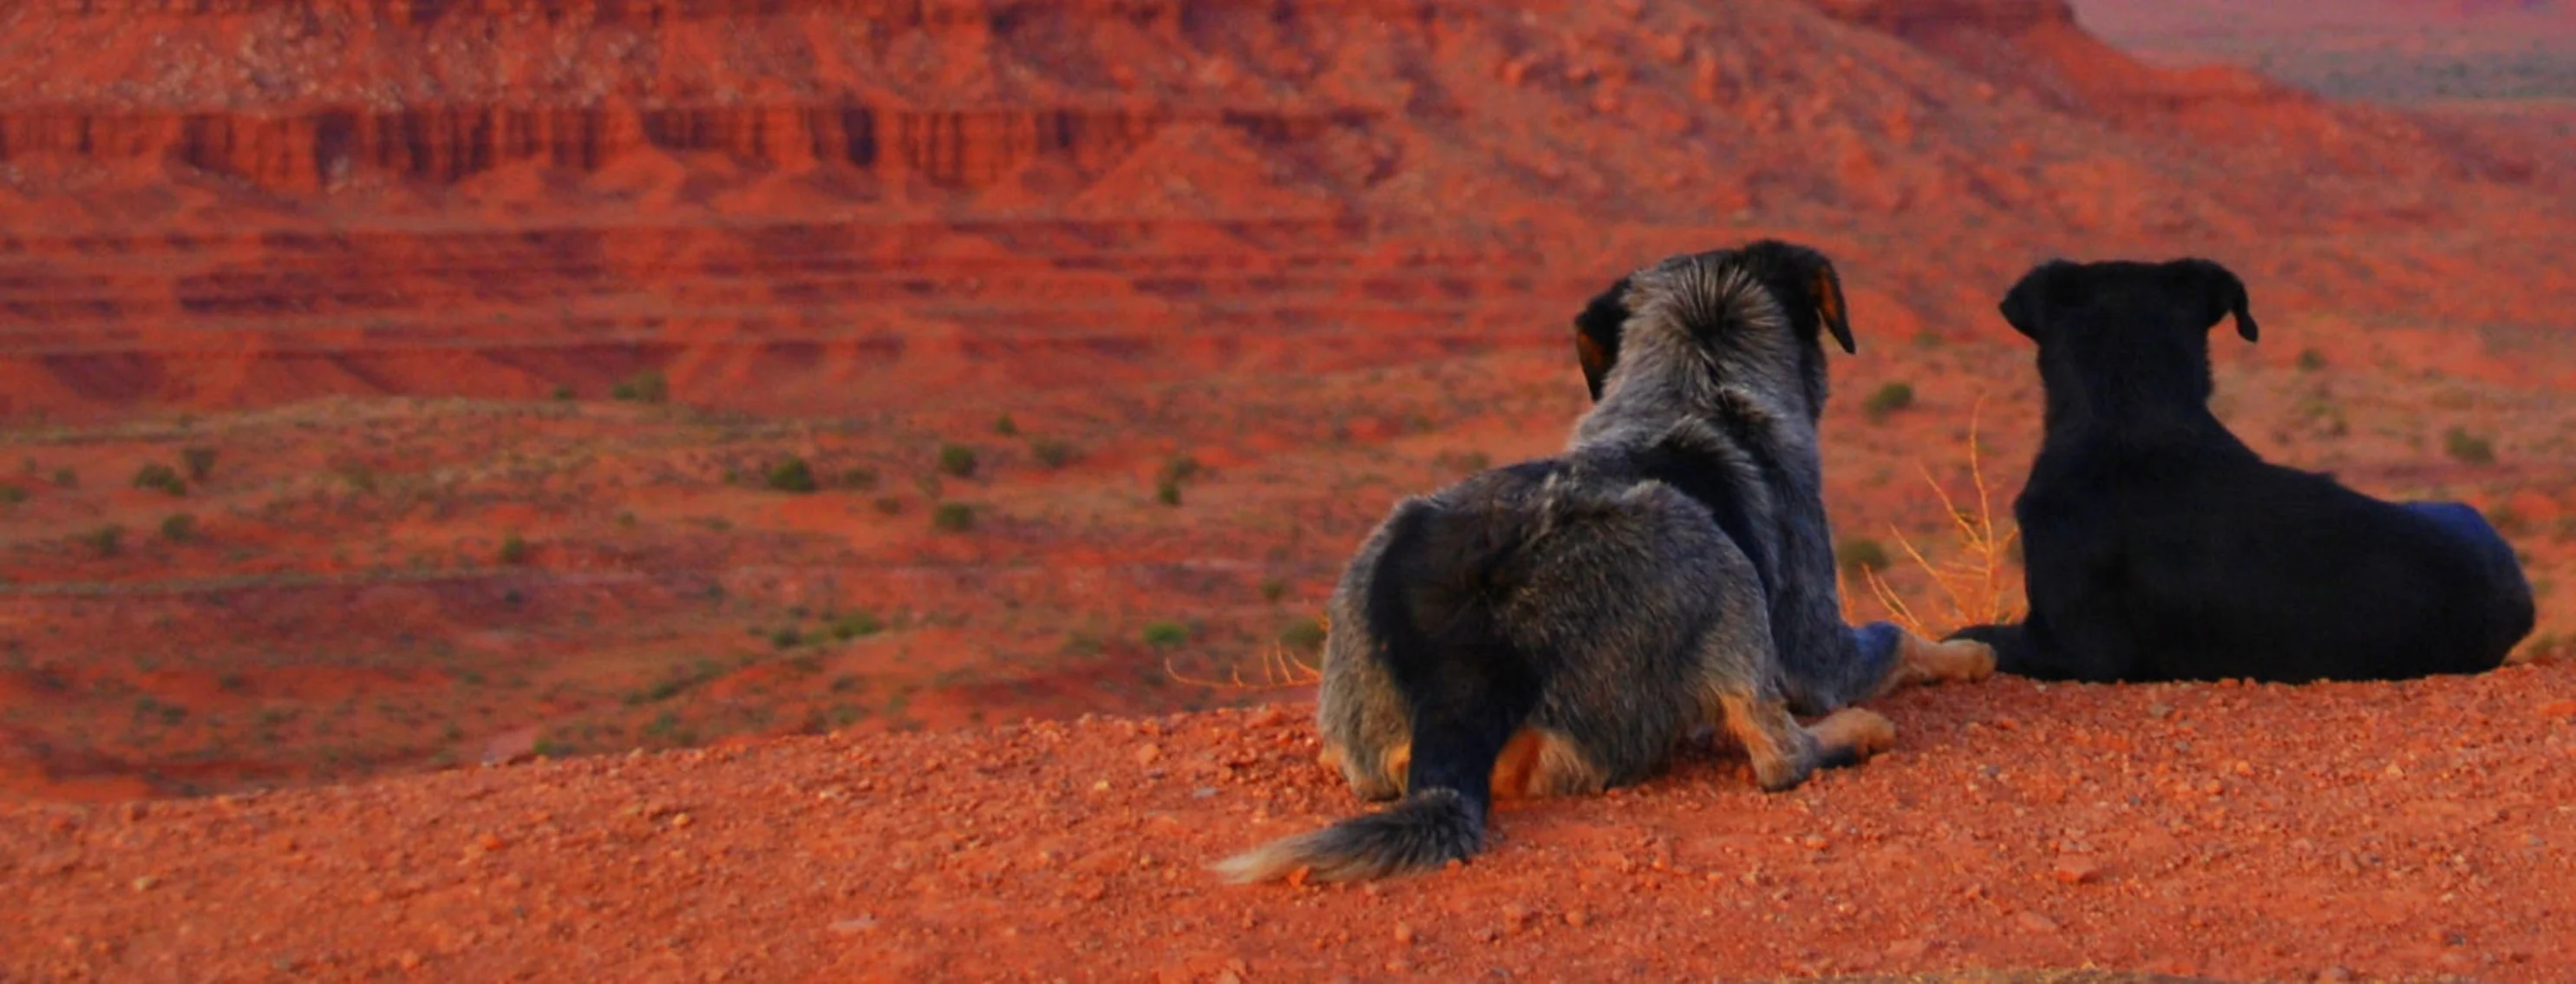 Two Dogs Sitting Together in Red Desert